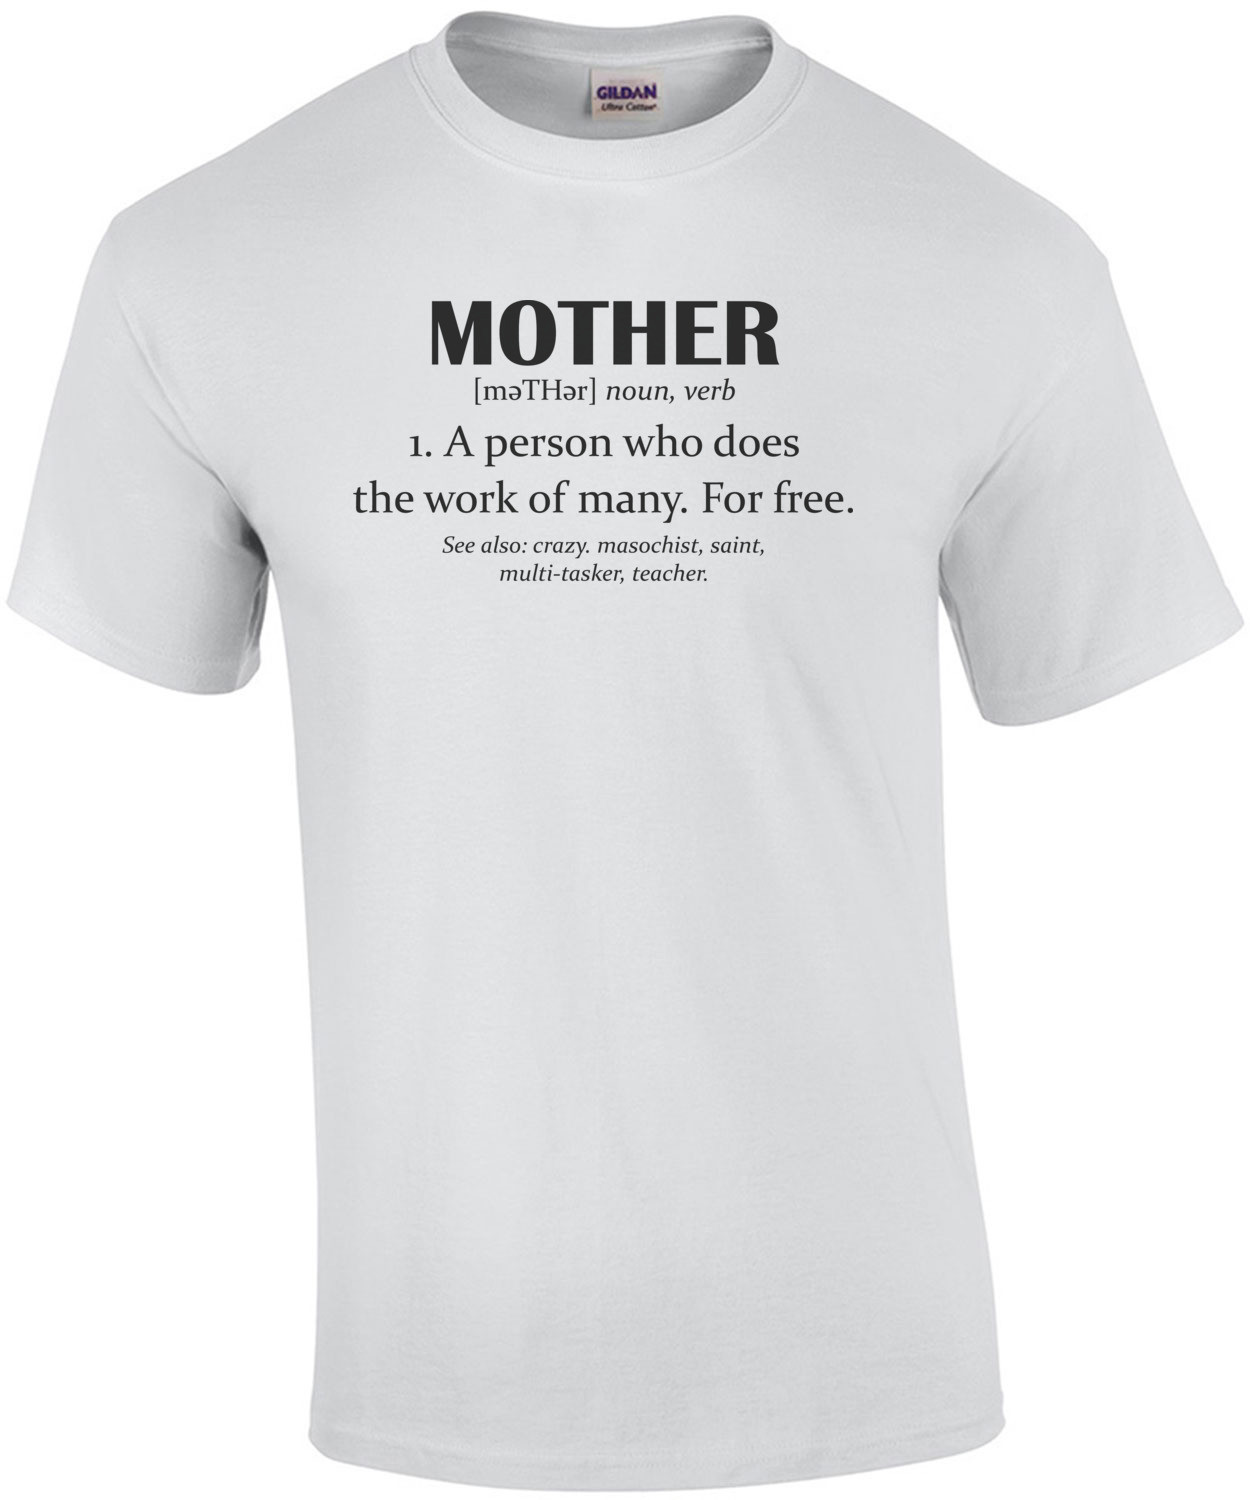 Mother Defined - Mother A person who does the work of many. For Free - Mother